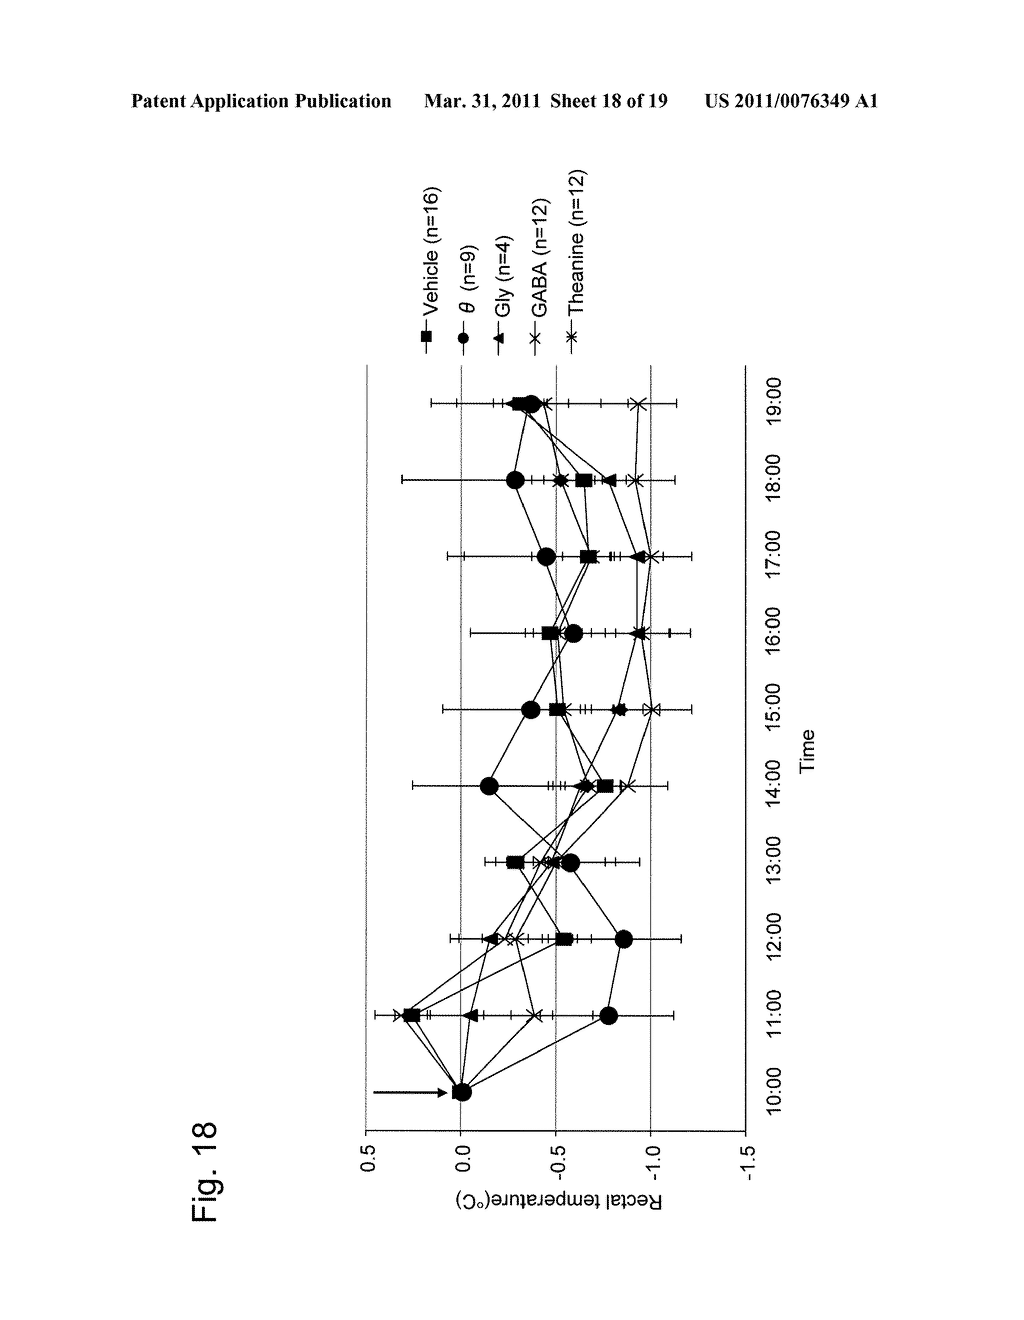 COMPOSITION CONTAINING HOT-WATER EXTRACT OF PLANT OF THE GENUS HEMEROCALLIS AND HAVING ANTIDEPRESSANT-LIKE EFFECTS OR FATIGUE-RELIEVING EFFECTS BASED ON SLEEP IMPROVEMENT - diagram, schematic, and image 19